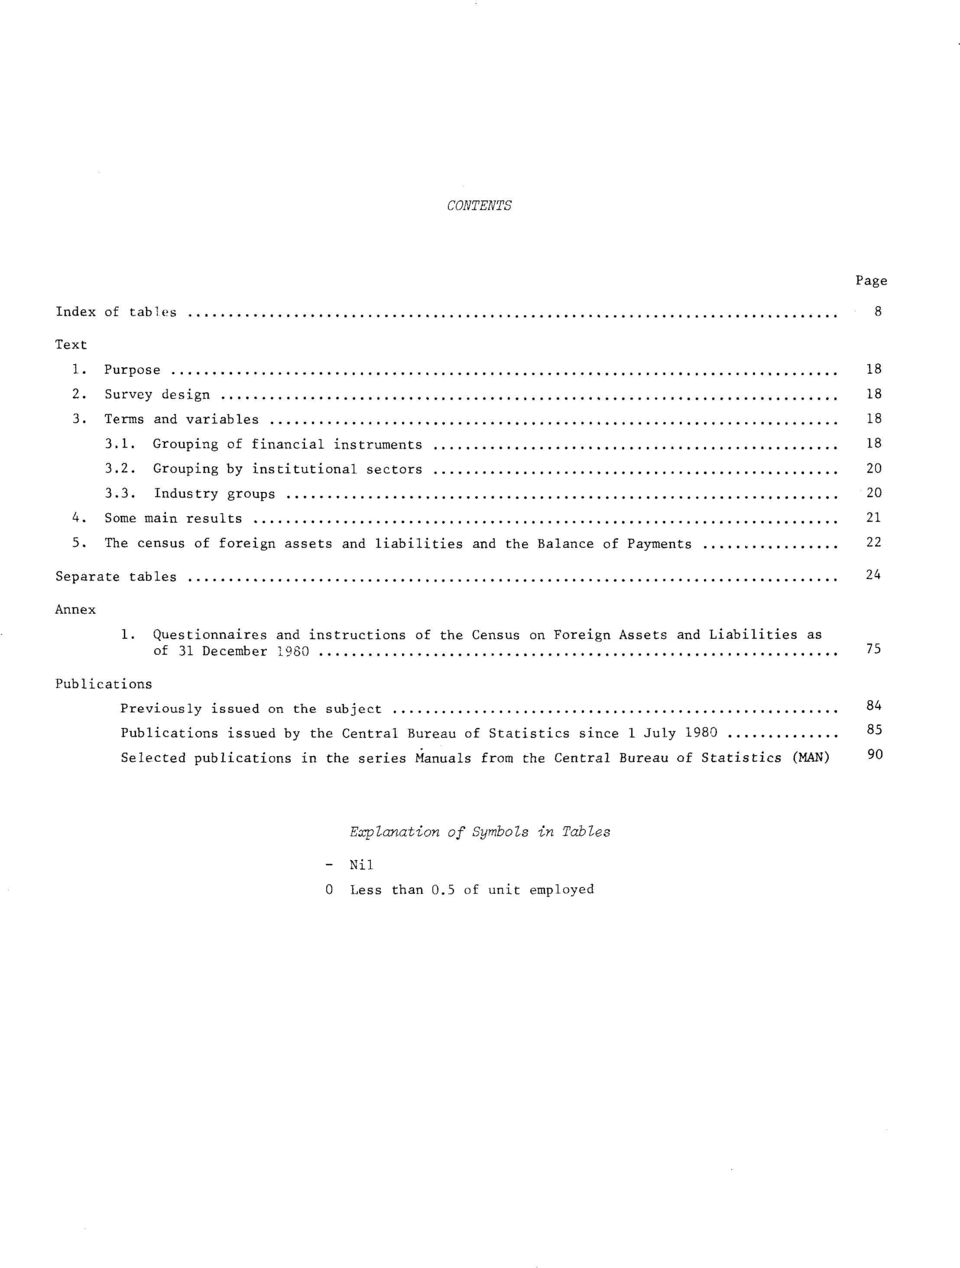 Questionnaires and instructions of the Census on Foreign Assets and Liabilities as of 31 December 198 75 Previously issued on the subject 84 Publications issued by the Central